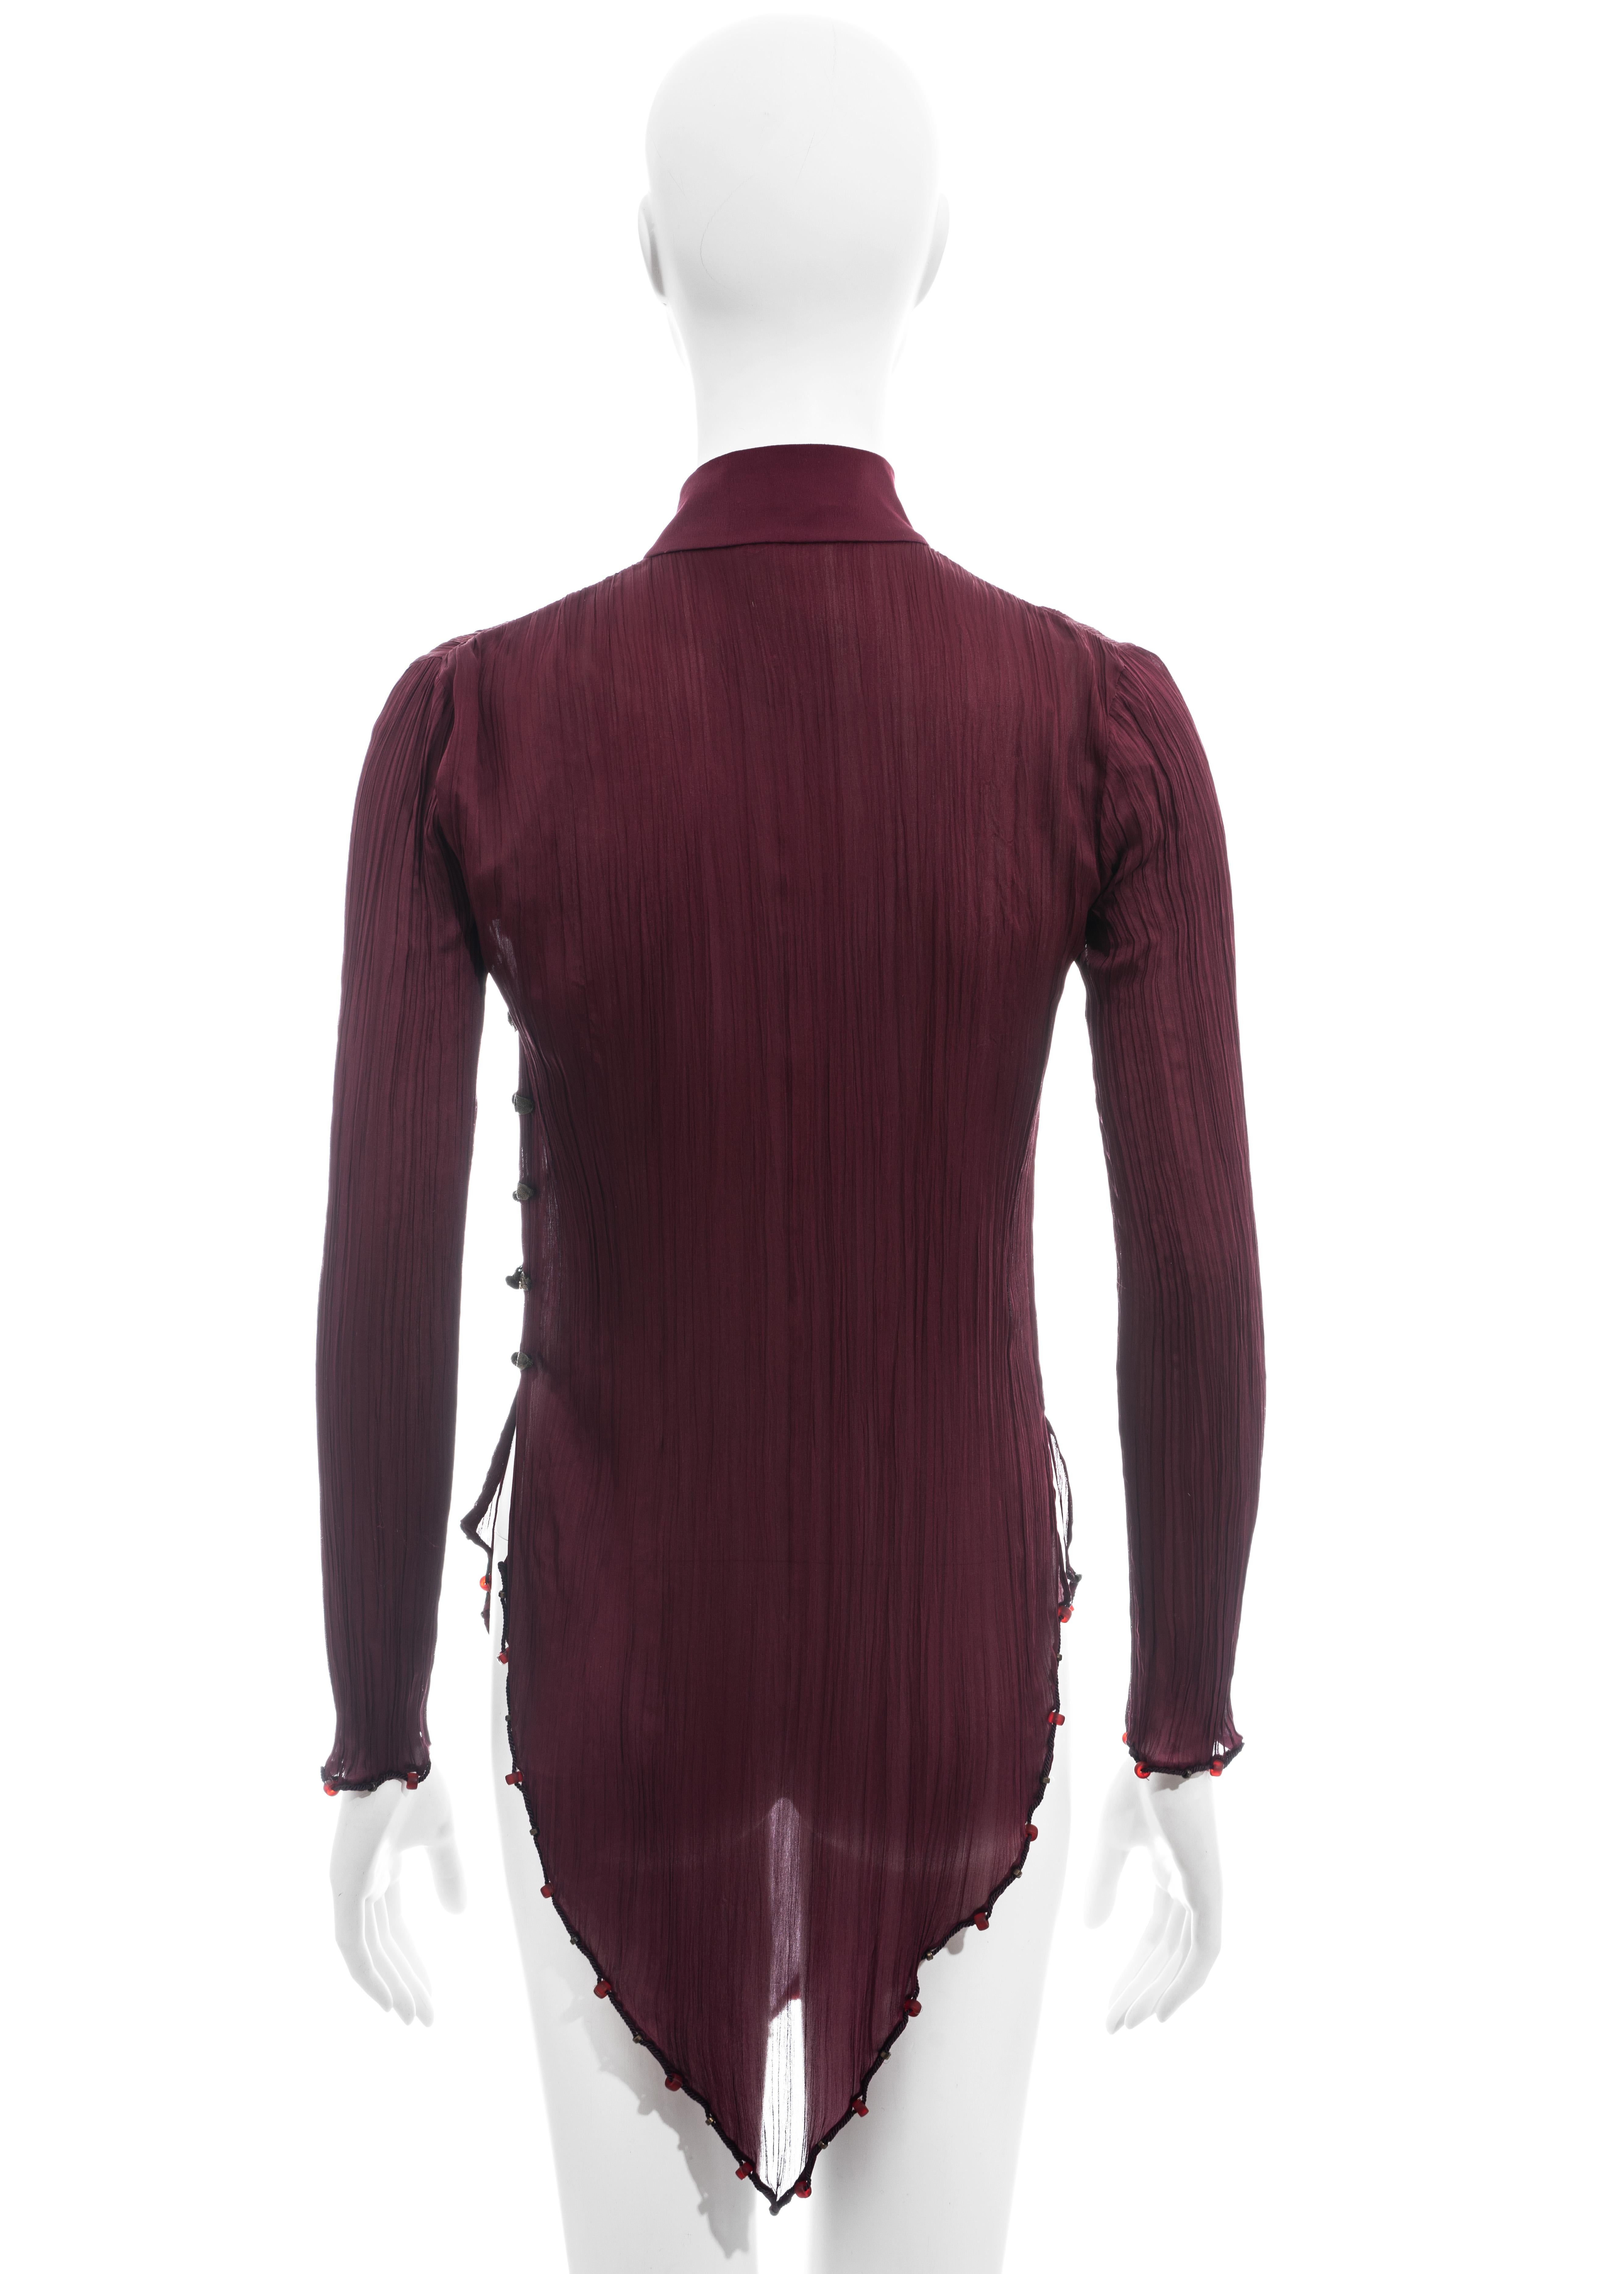 Christian Dior by John Galliano burgundy pleated silk blouse, ss 1999 For Sale 2